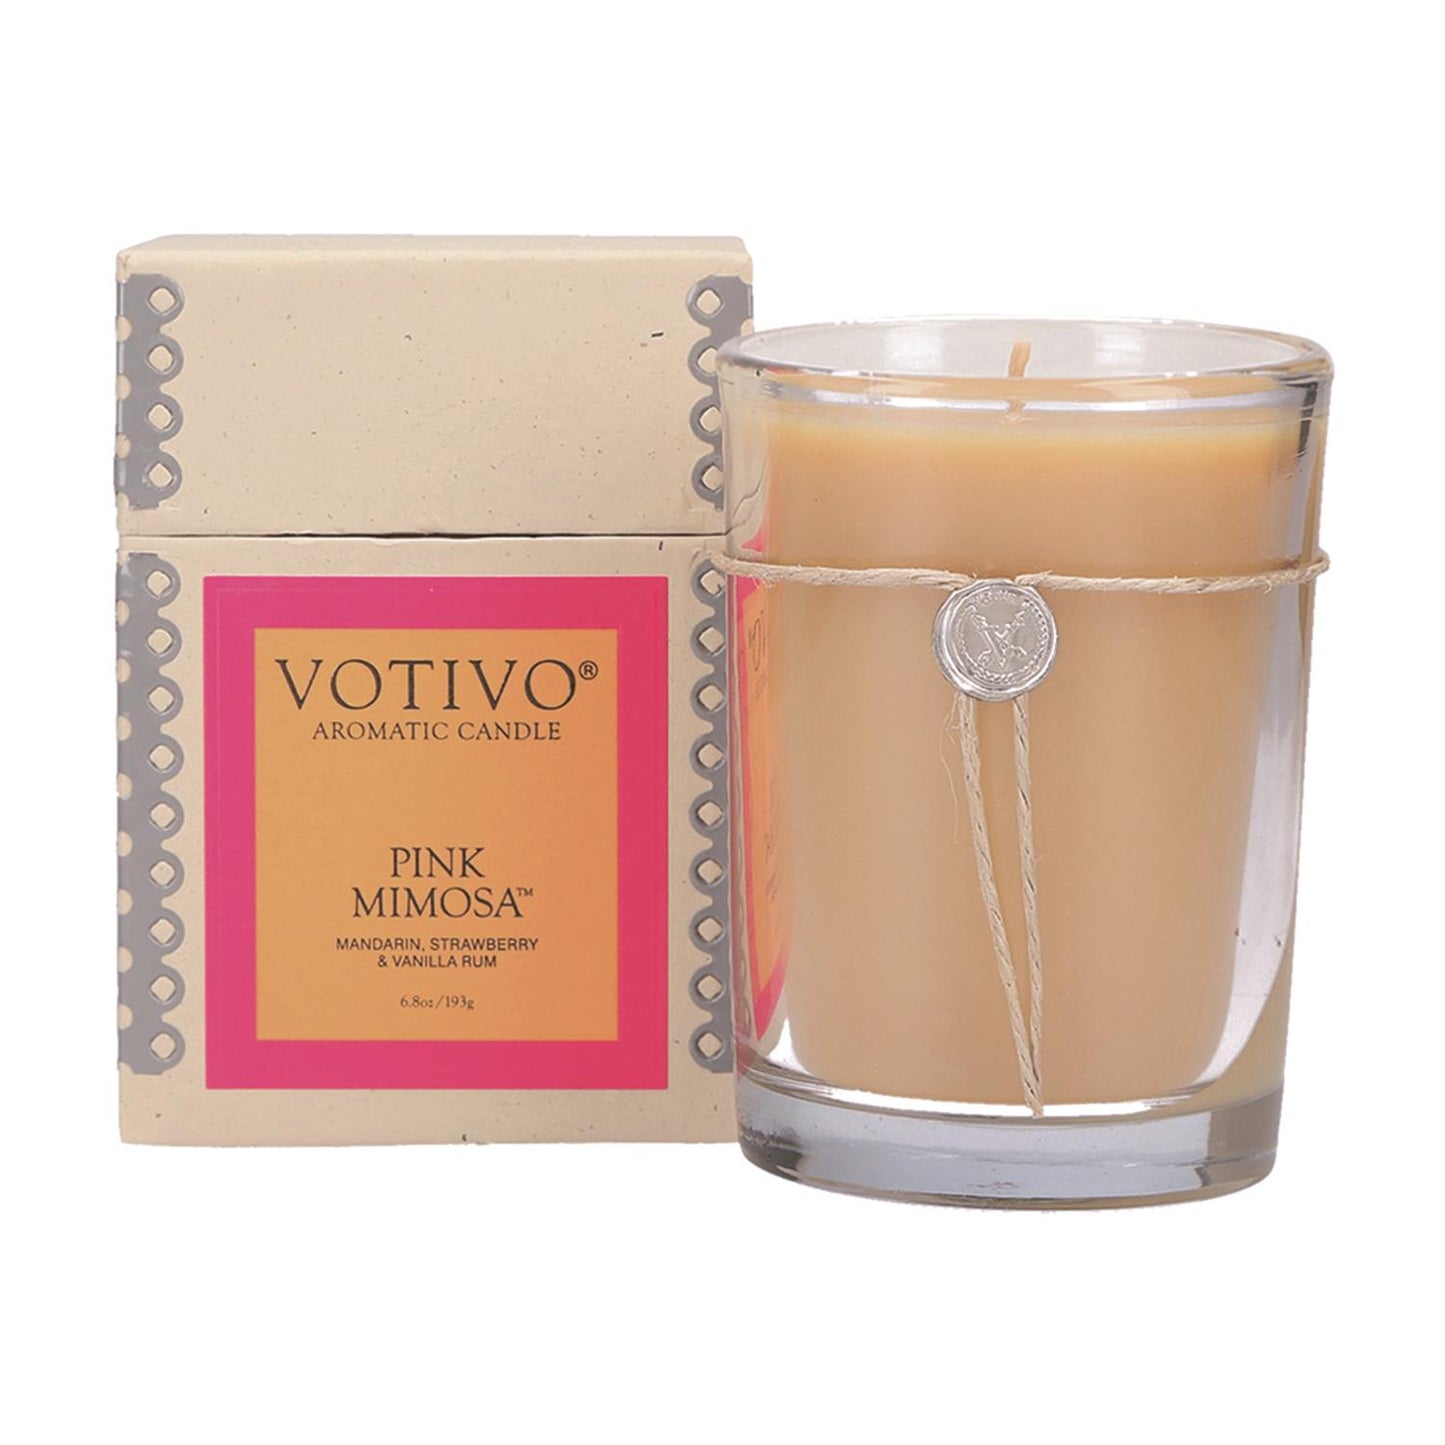 Votivo Pink Mimosa Soy Candle